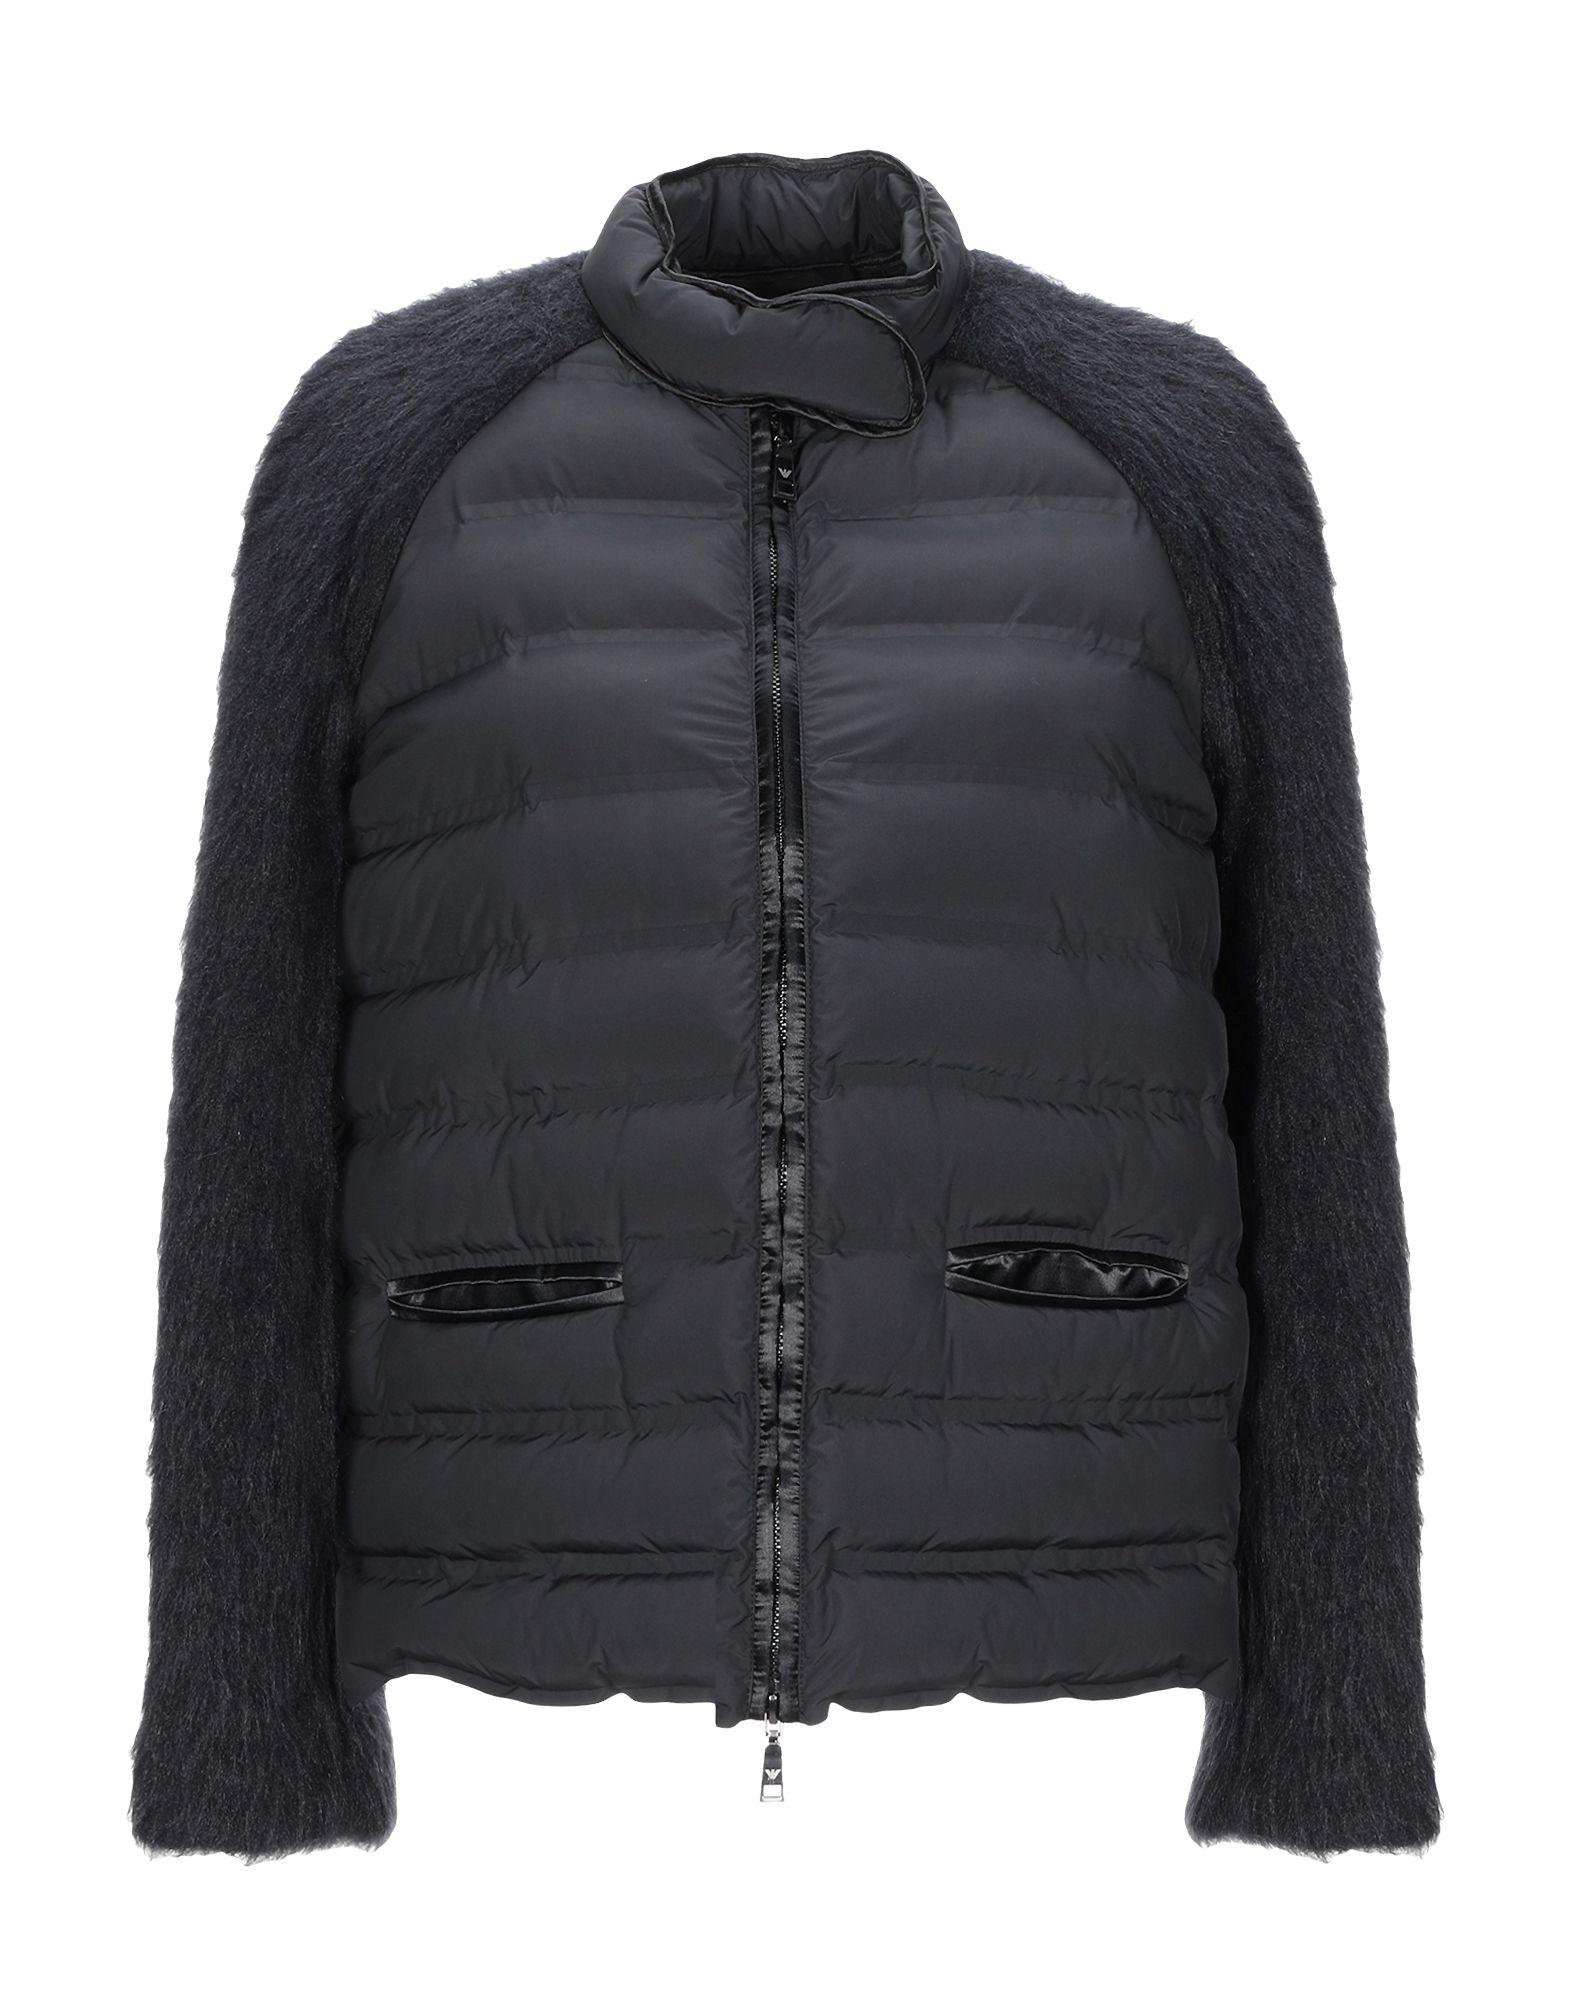 Emporio Armani Synthetic Down Jacket in Black - Lyst